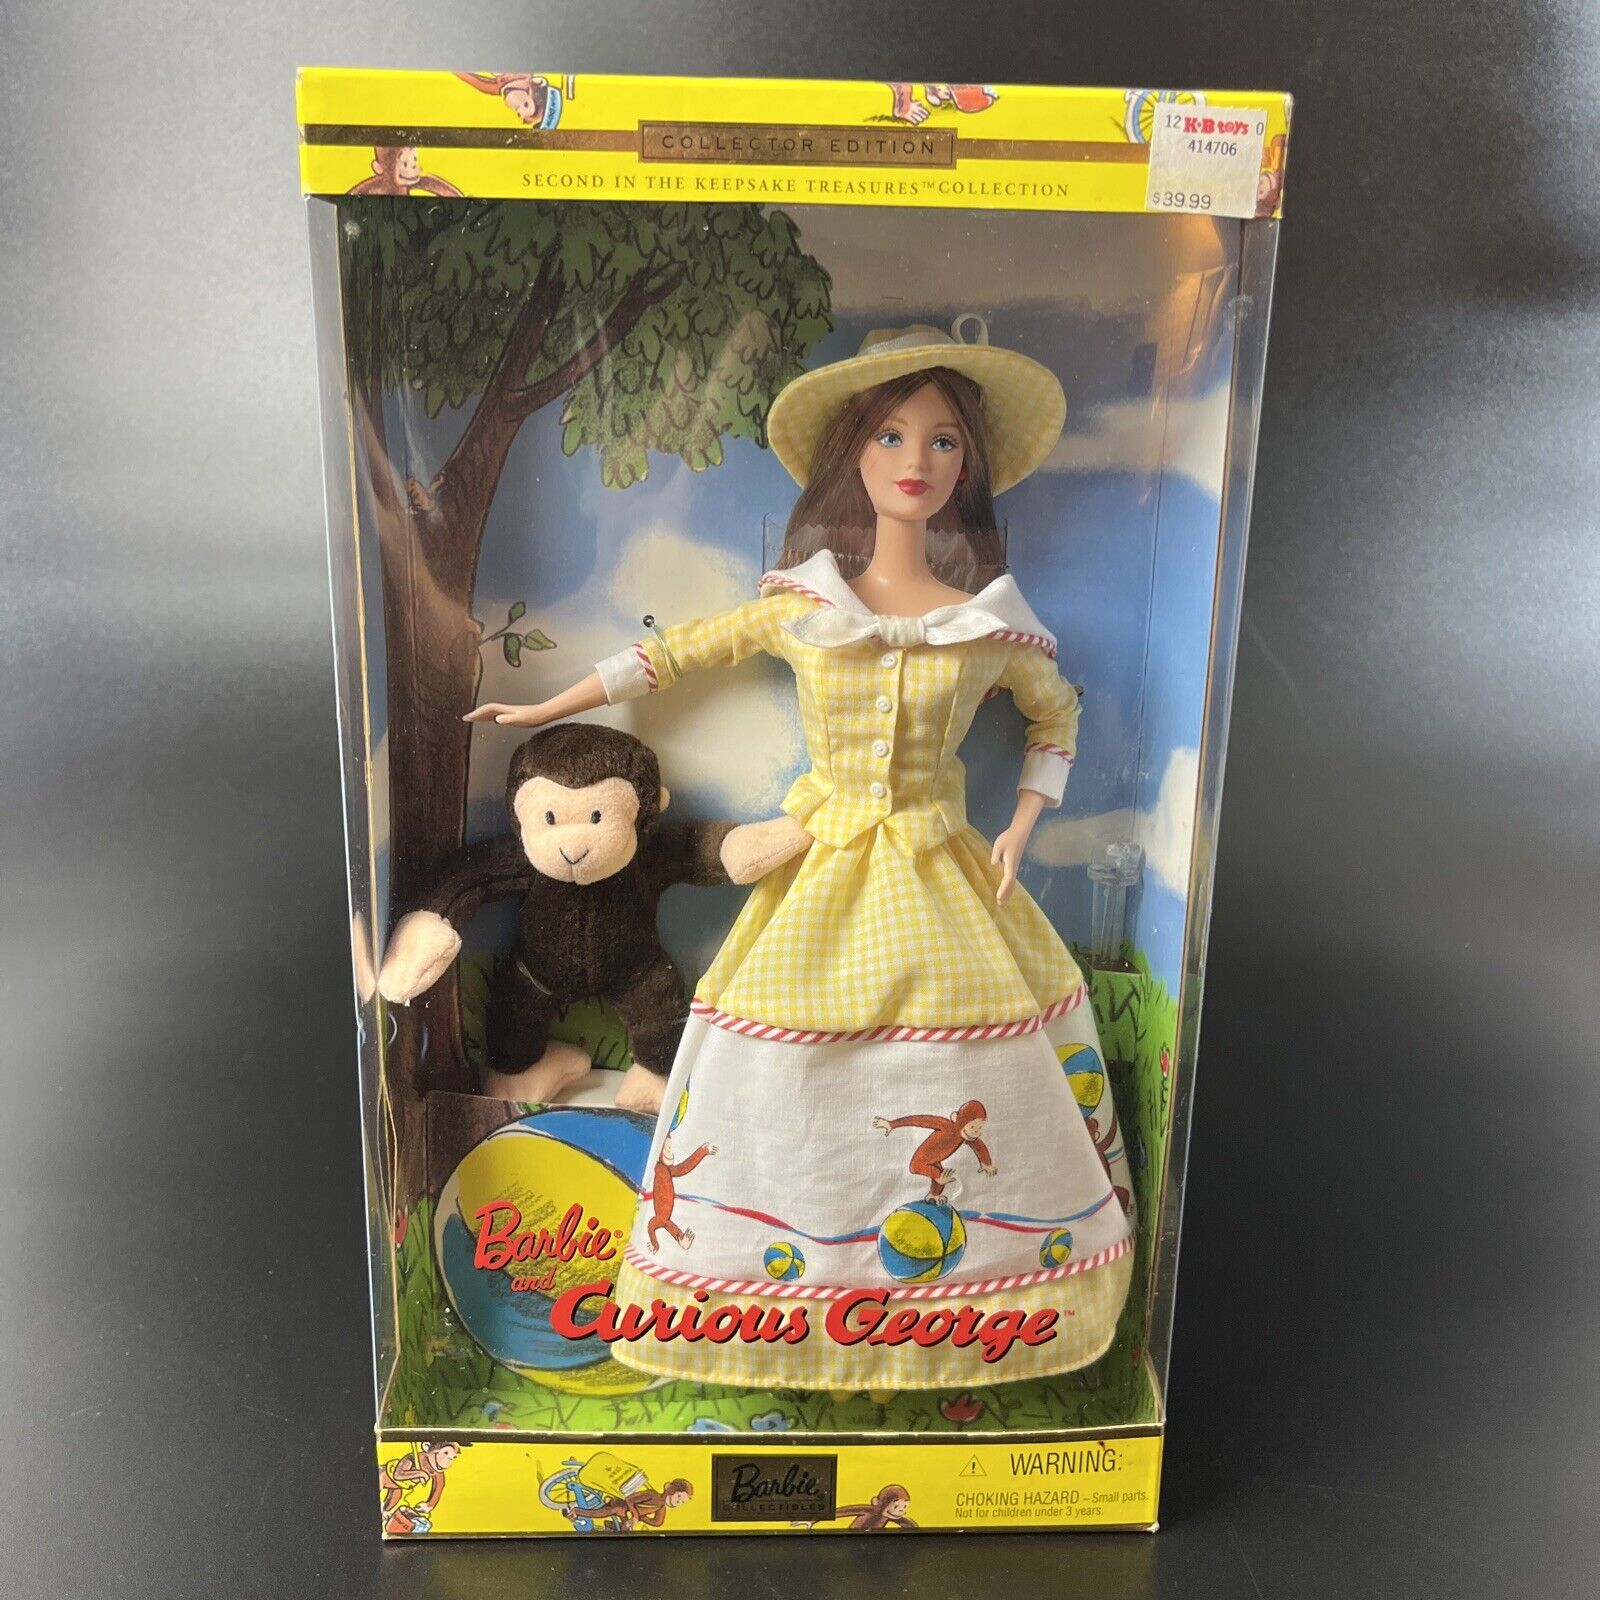 Barbie and Curious George Doll Set Keepsake Treasures Collection 2000 Mattel New